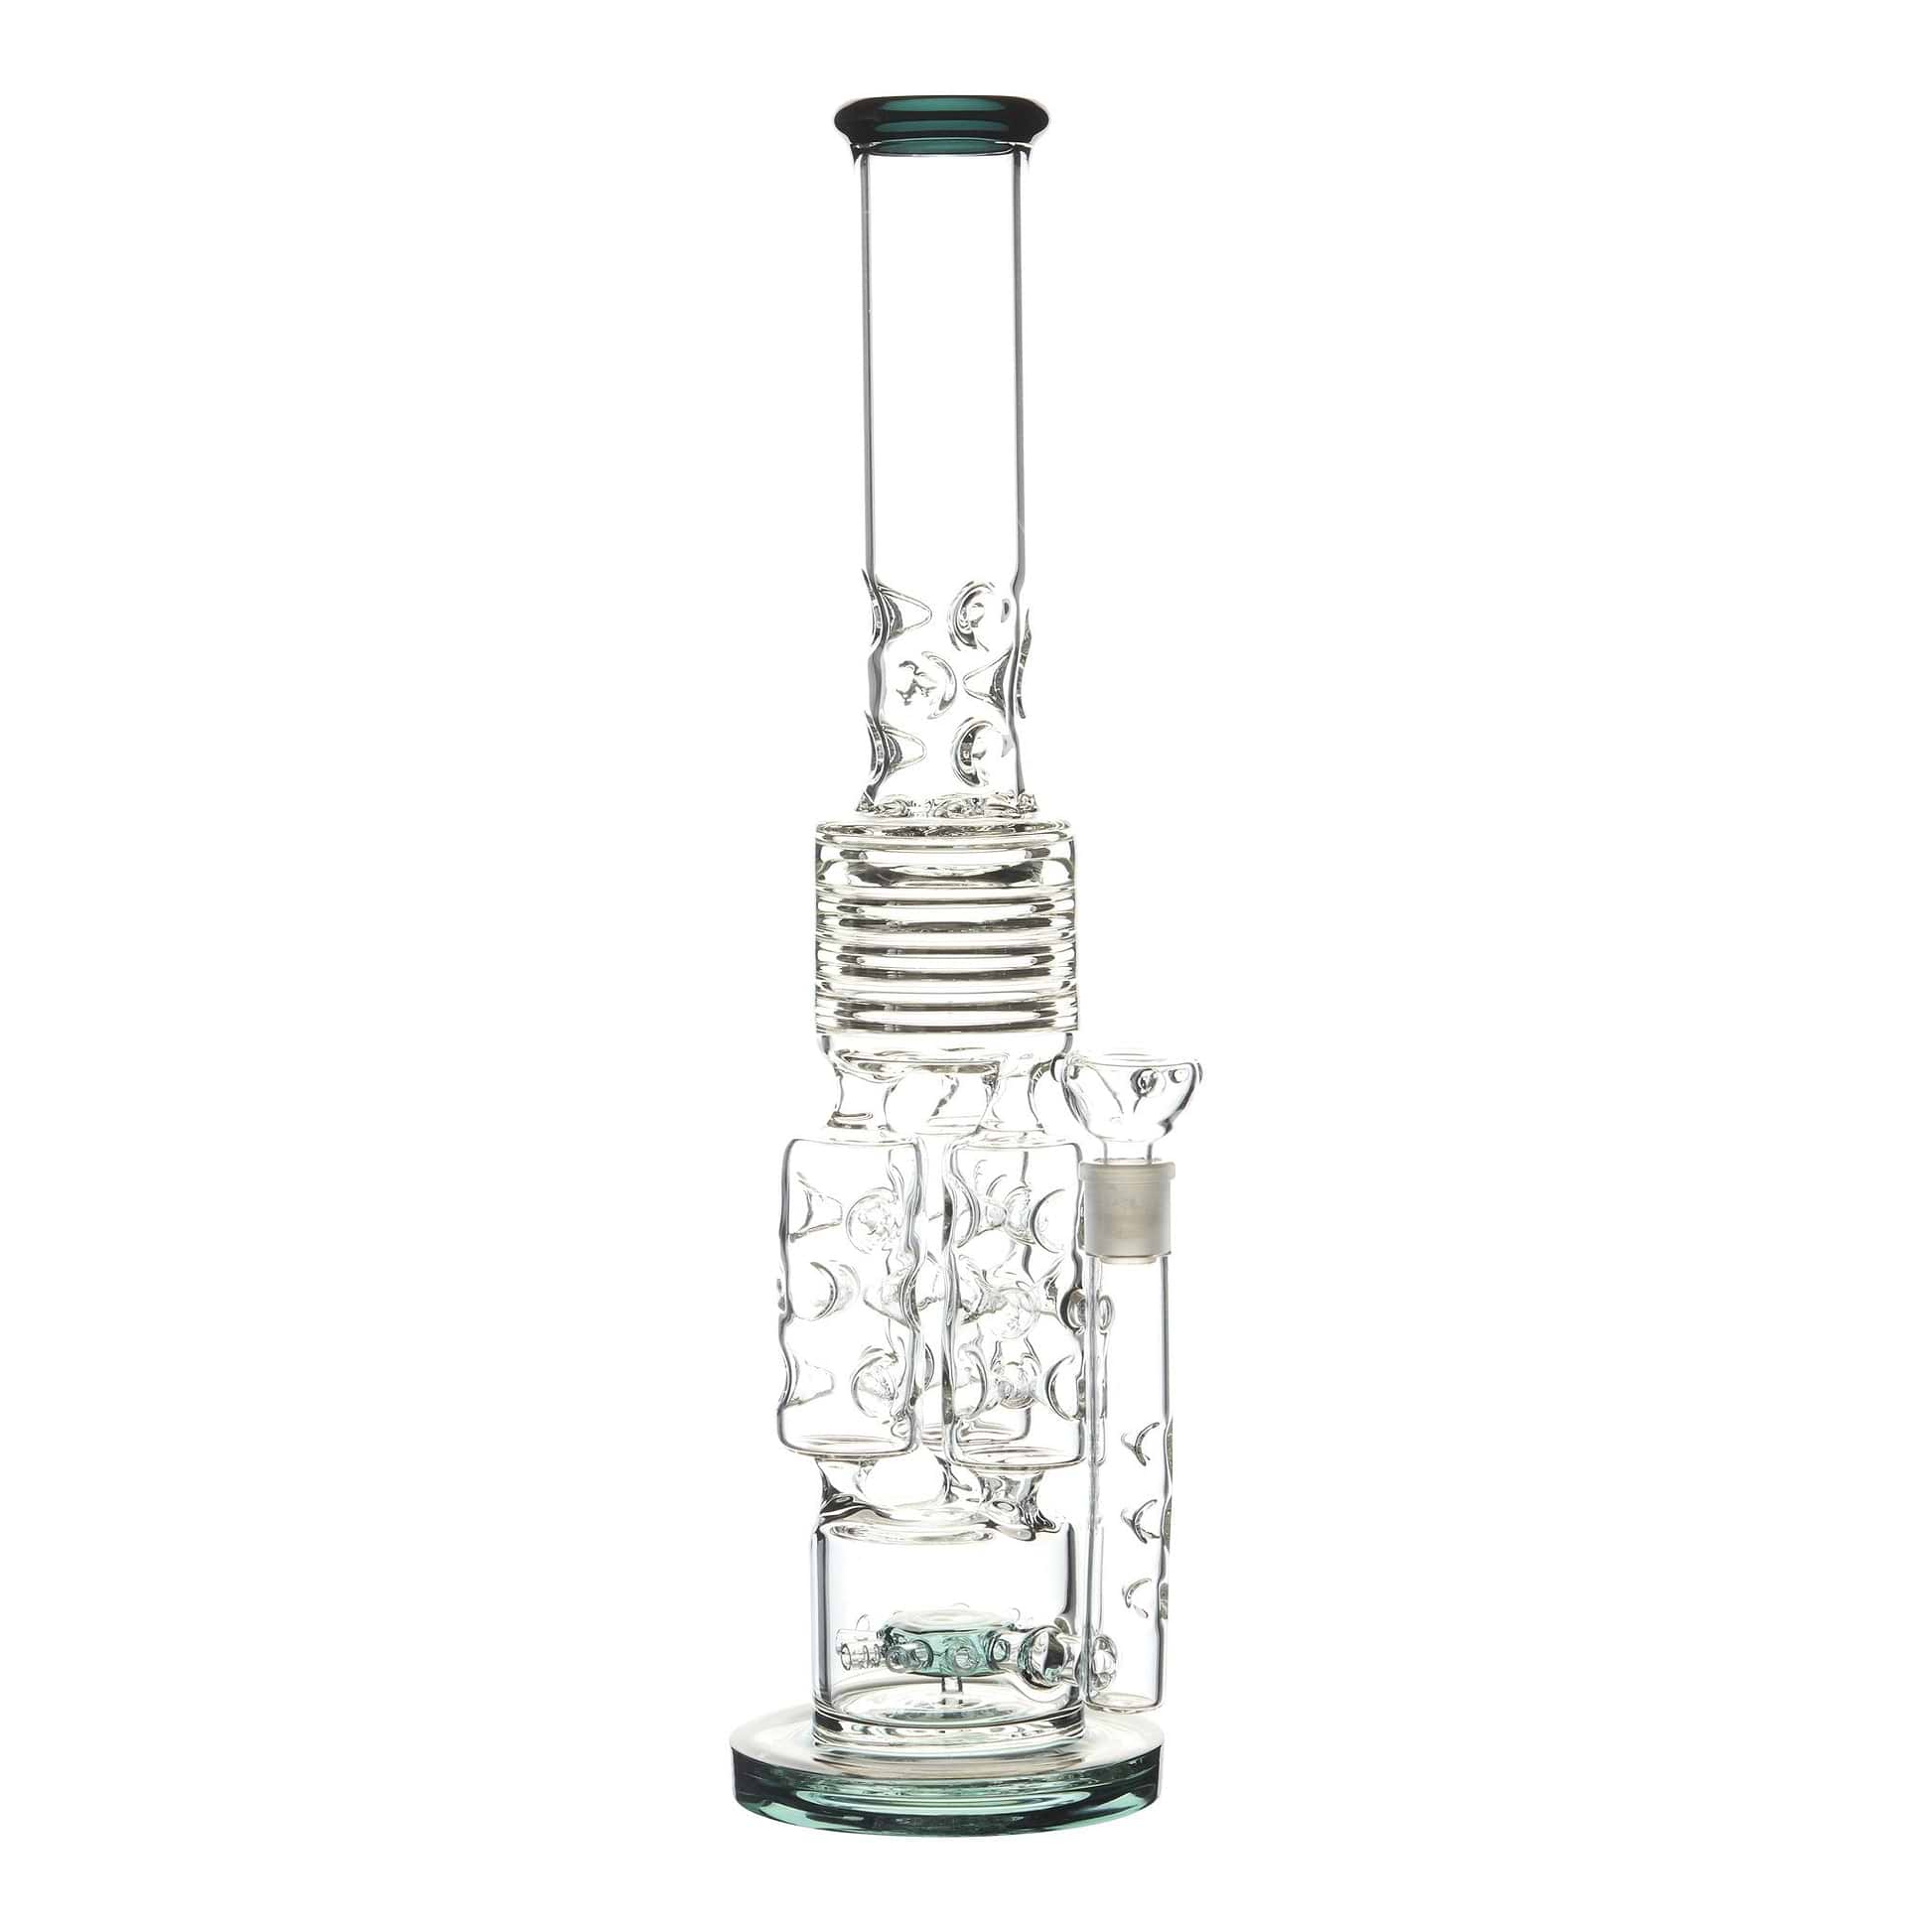 Full shot of 19 inch huge glass straight bong with teal accents multiple chamber bowl on right 